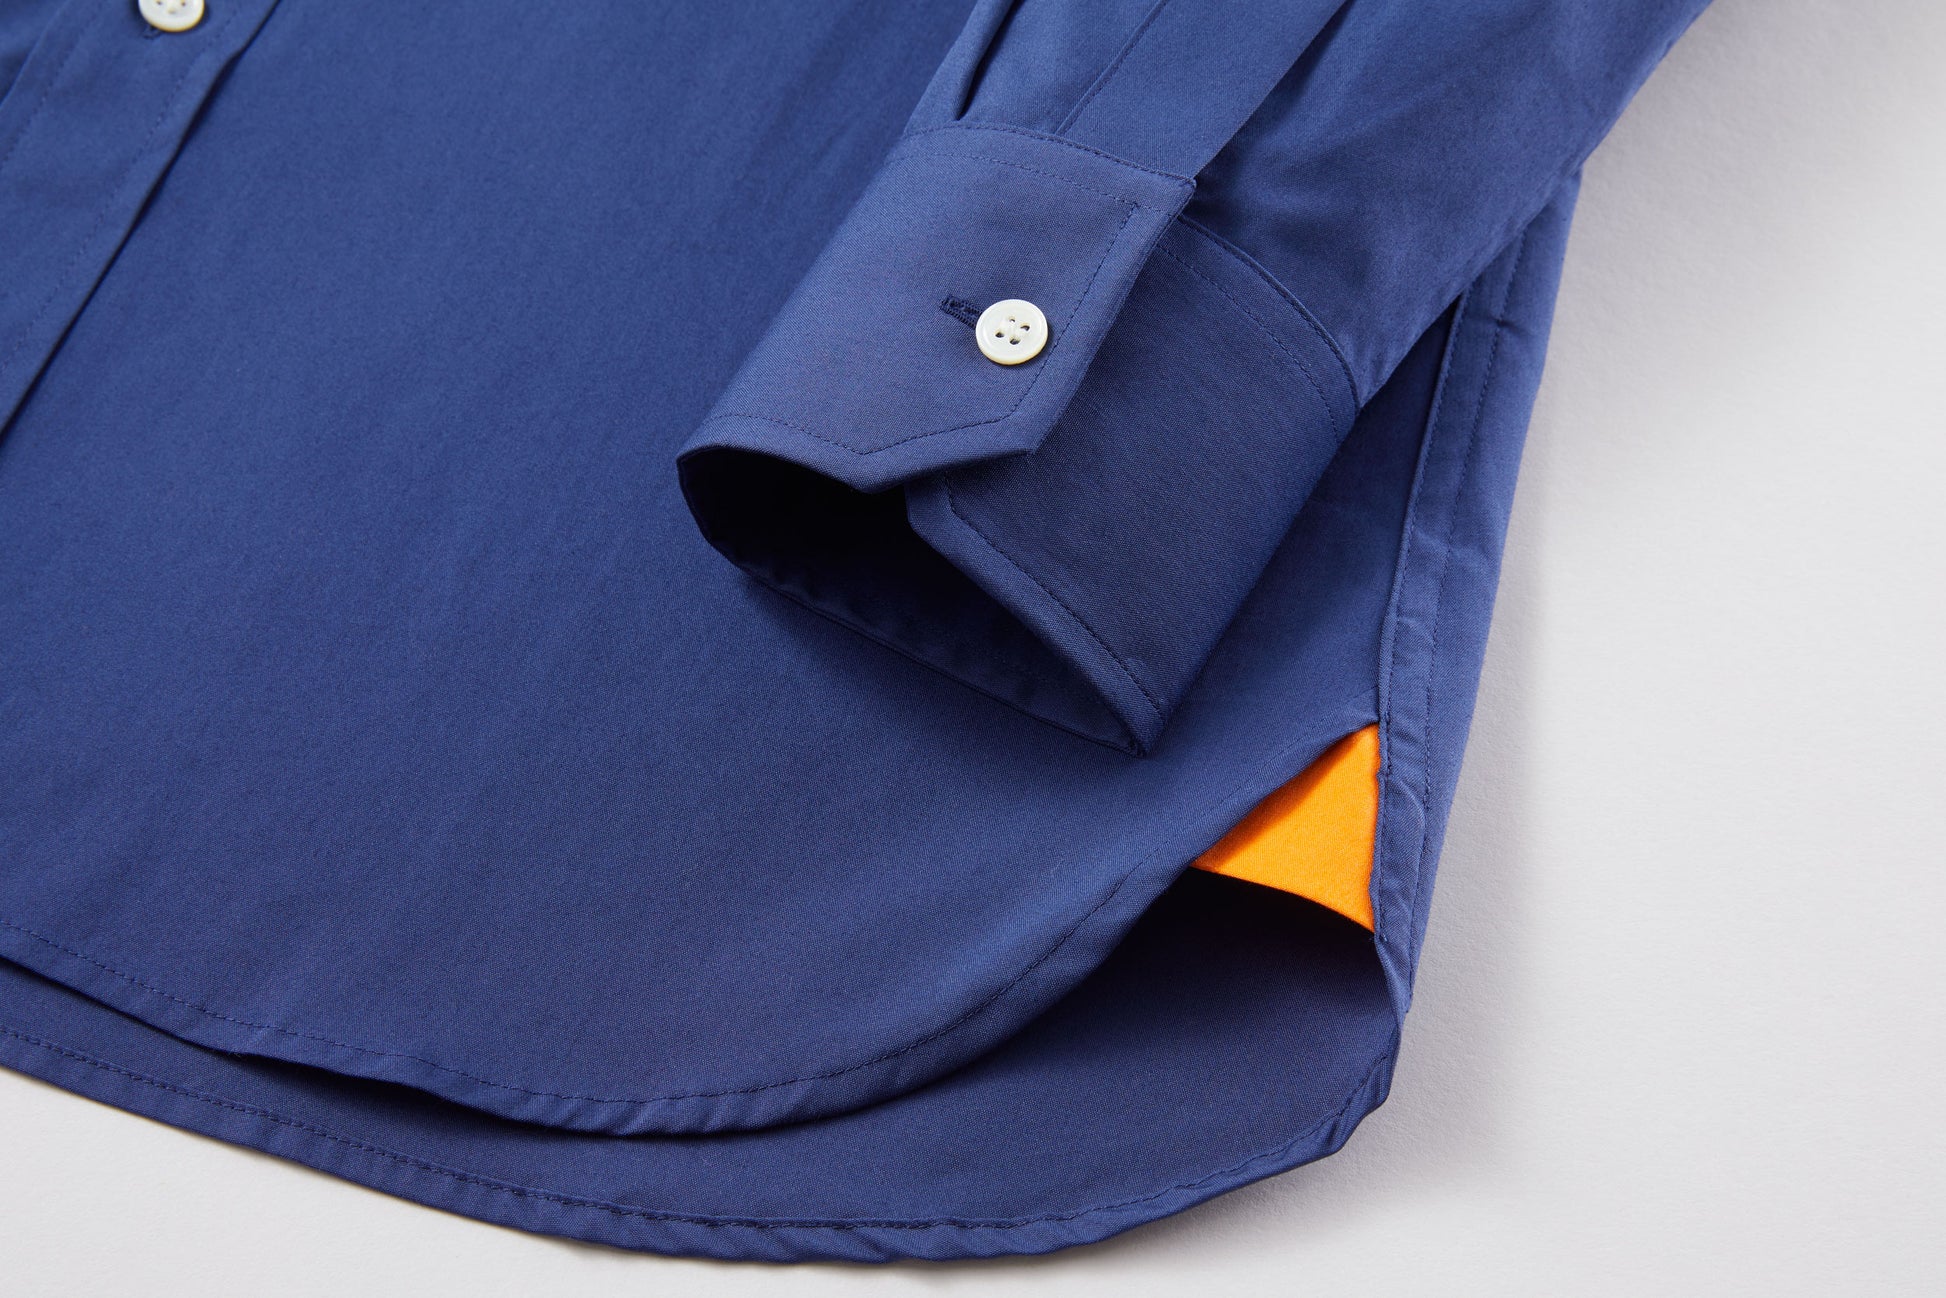 Our signature fall button down is made from cotton and remains neat beneath a sweater.